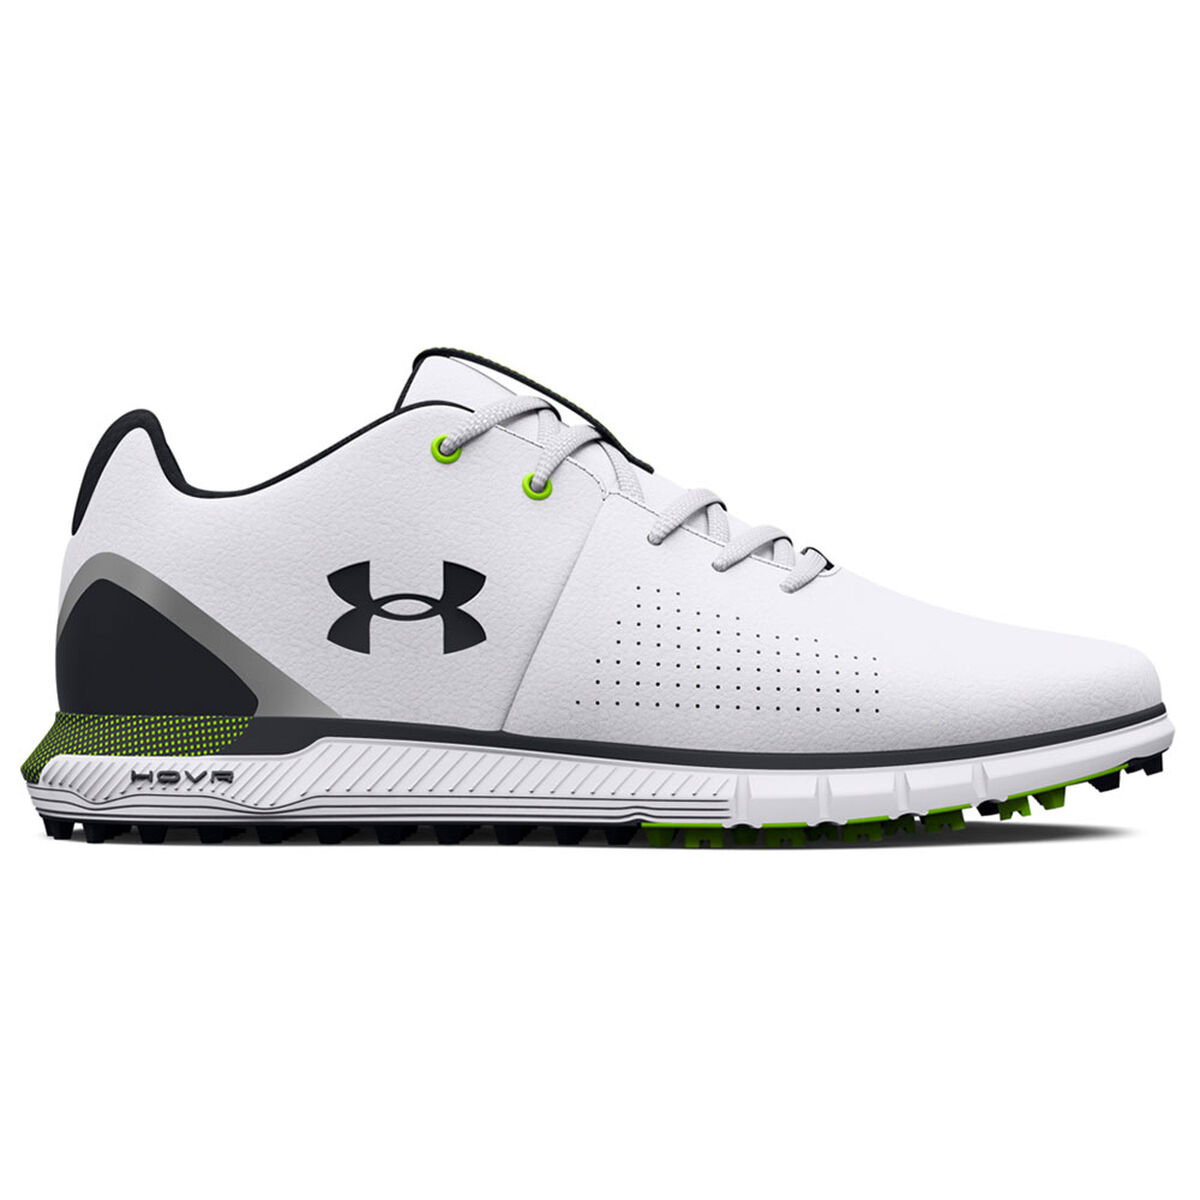 Under Armour Men’s White and Black HOVR Fade 2 Spikeless Golf Shoes, Size: 8 | American Golf